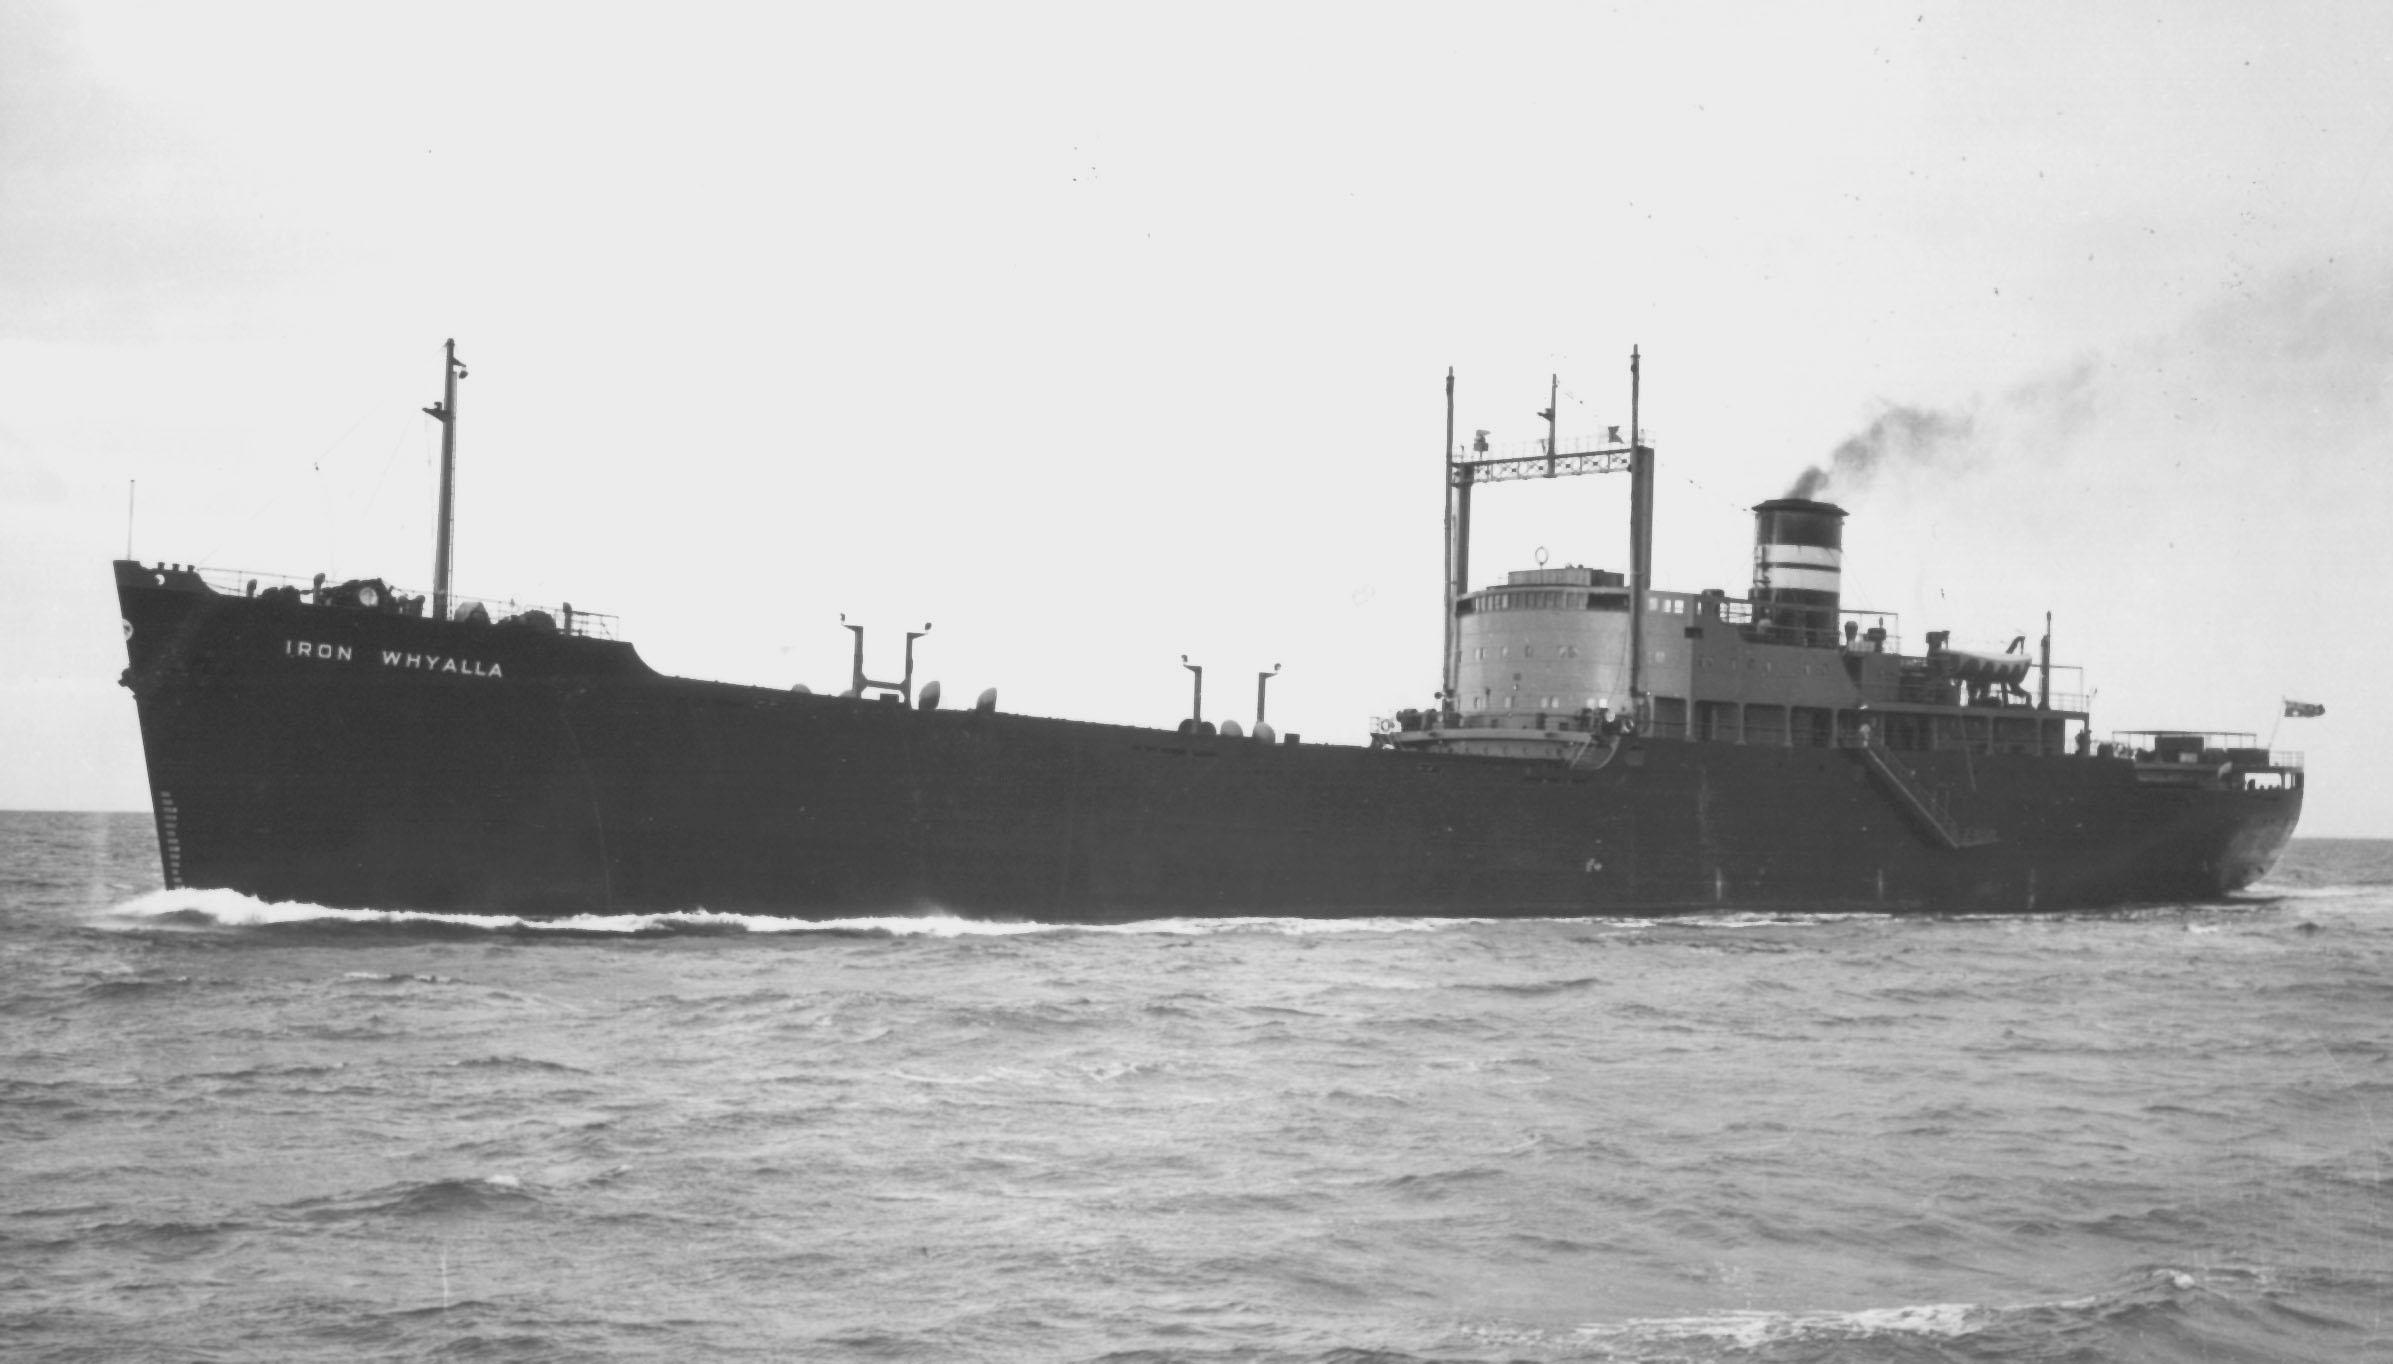 General Cargo vessel "Iron Whyalla".  Built in Whyalla in 1954, employed in stell trades, and owned by Broken Hill Pty Co Ltd.
Official Number:  177245
Dimensions:  length 489'0", breadth 62'1", draught 25'91/4"
Port Of Registry:  Melbourne
Flag:  Bri